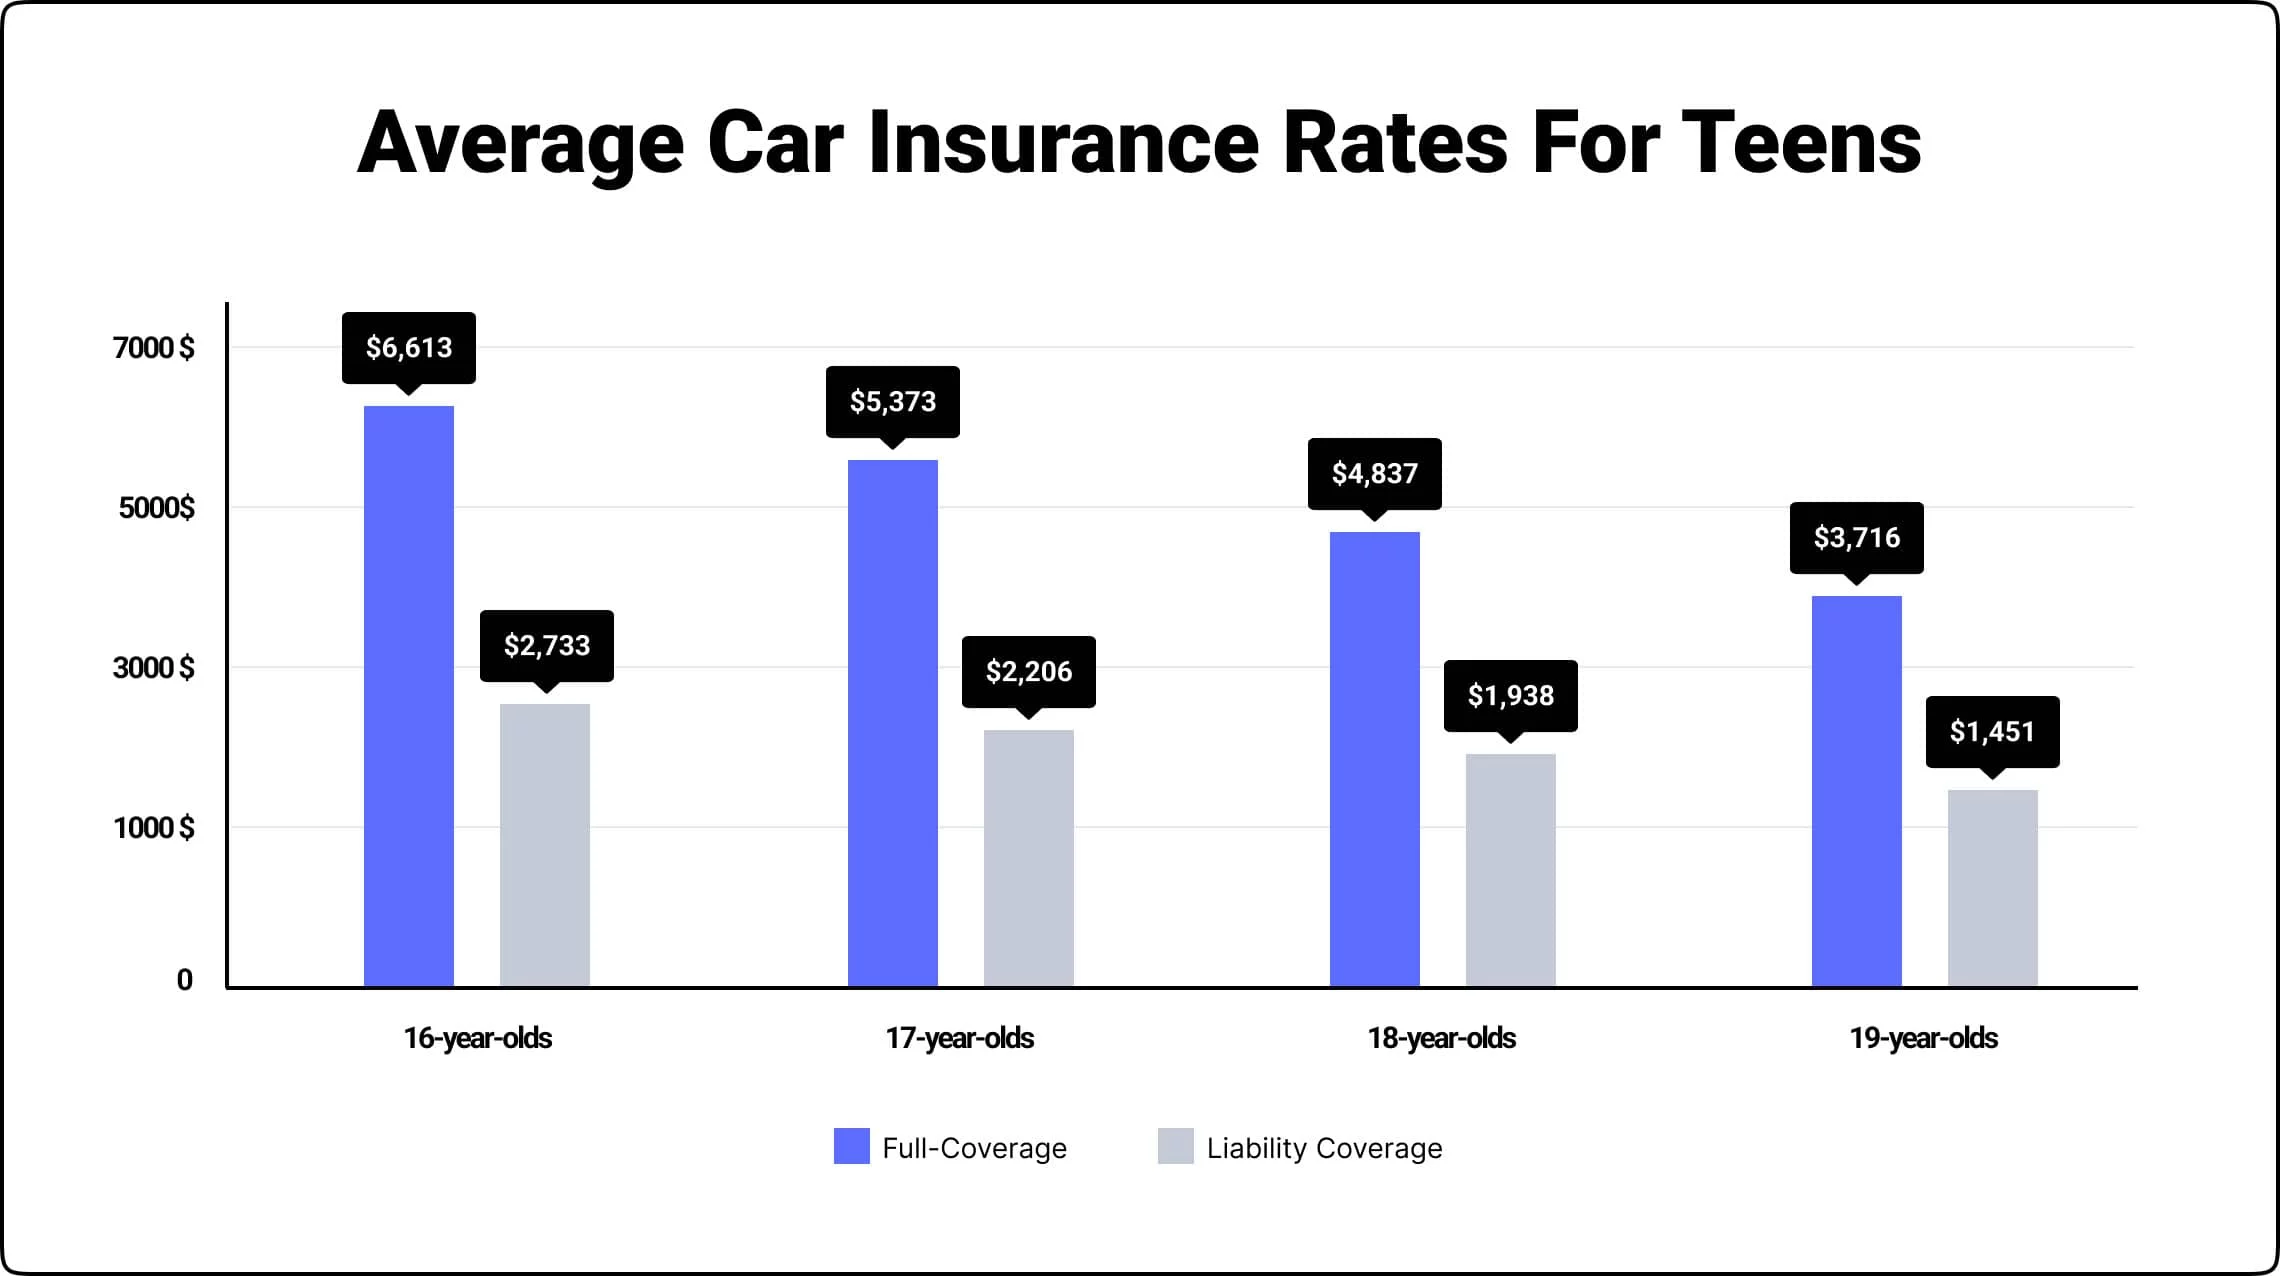 Car insurance rates for teens